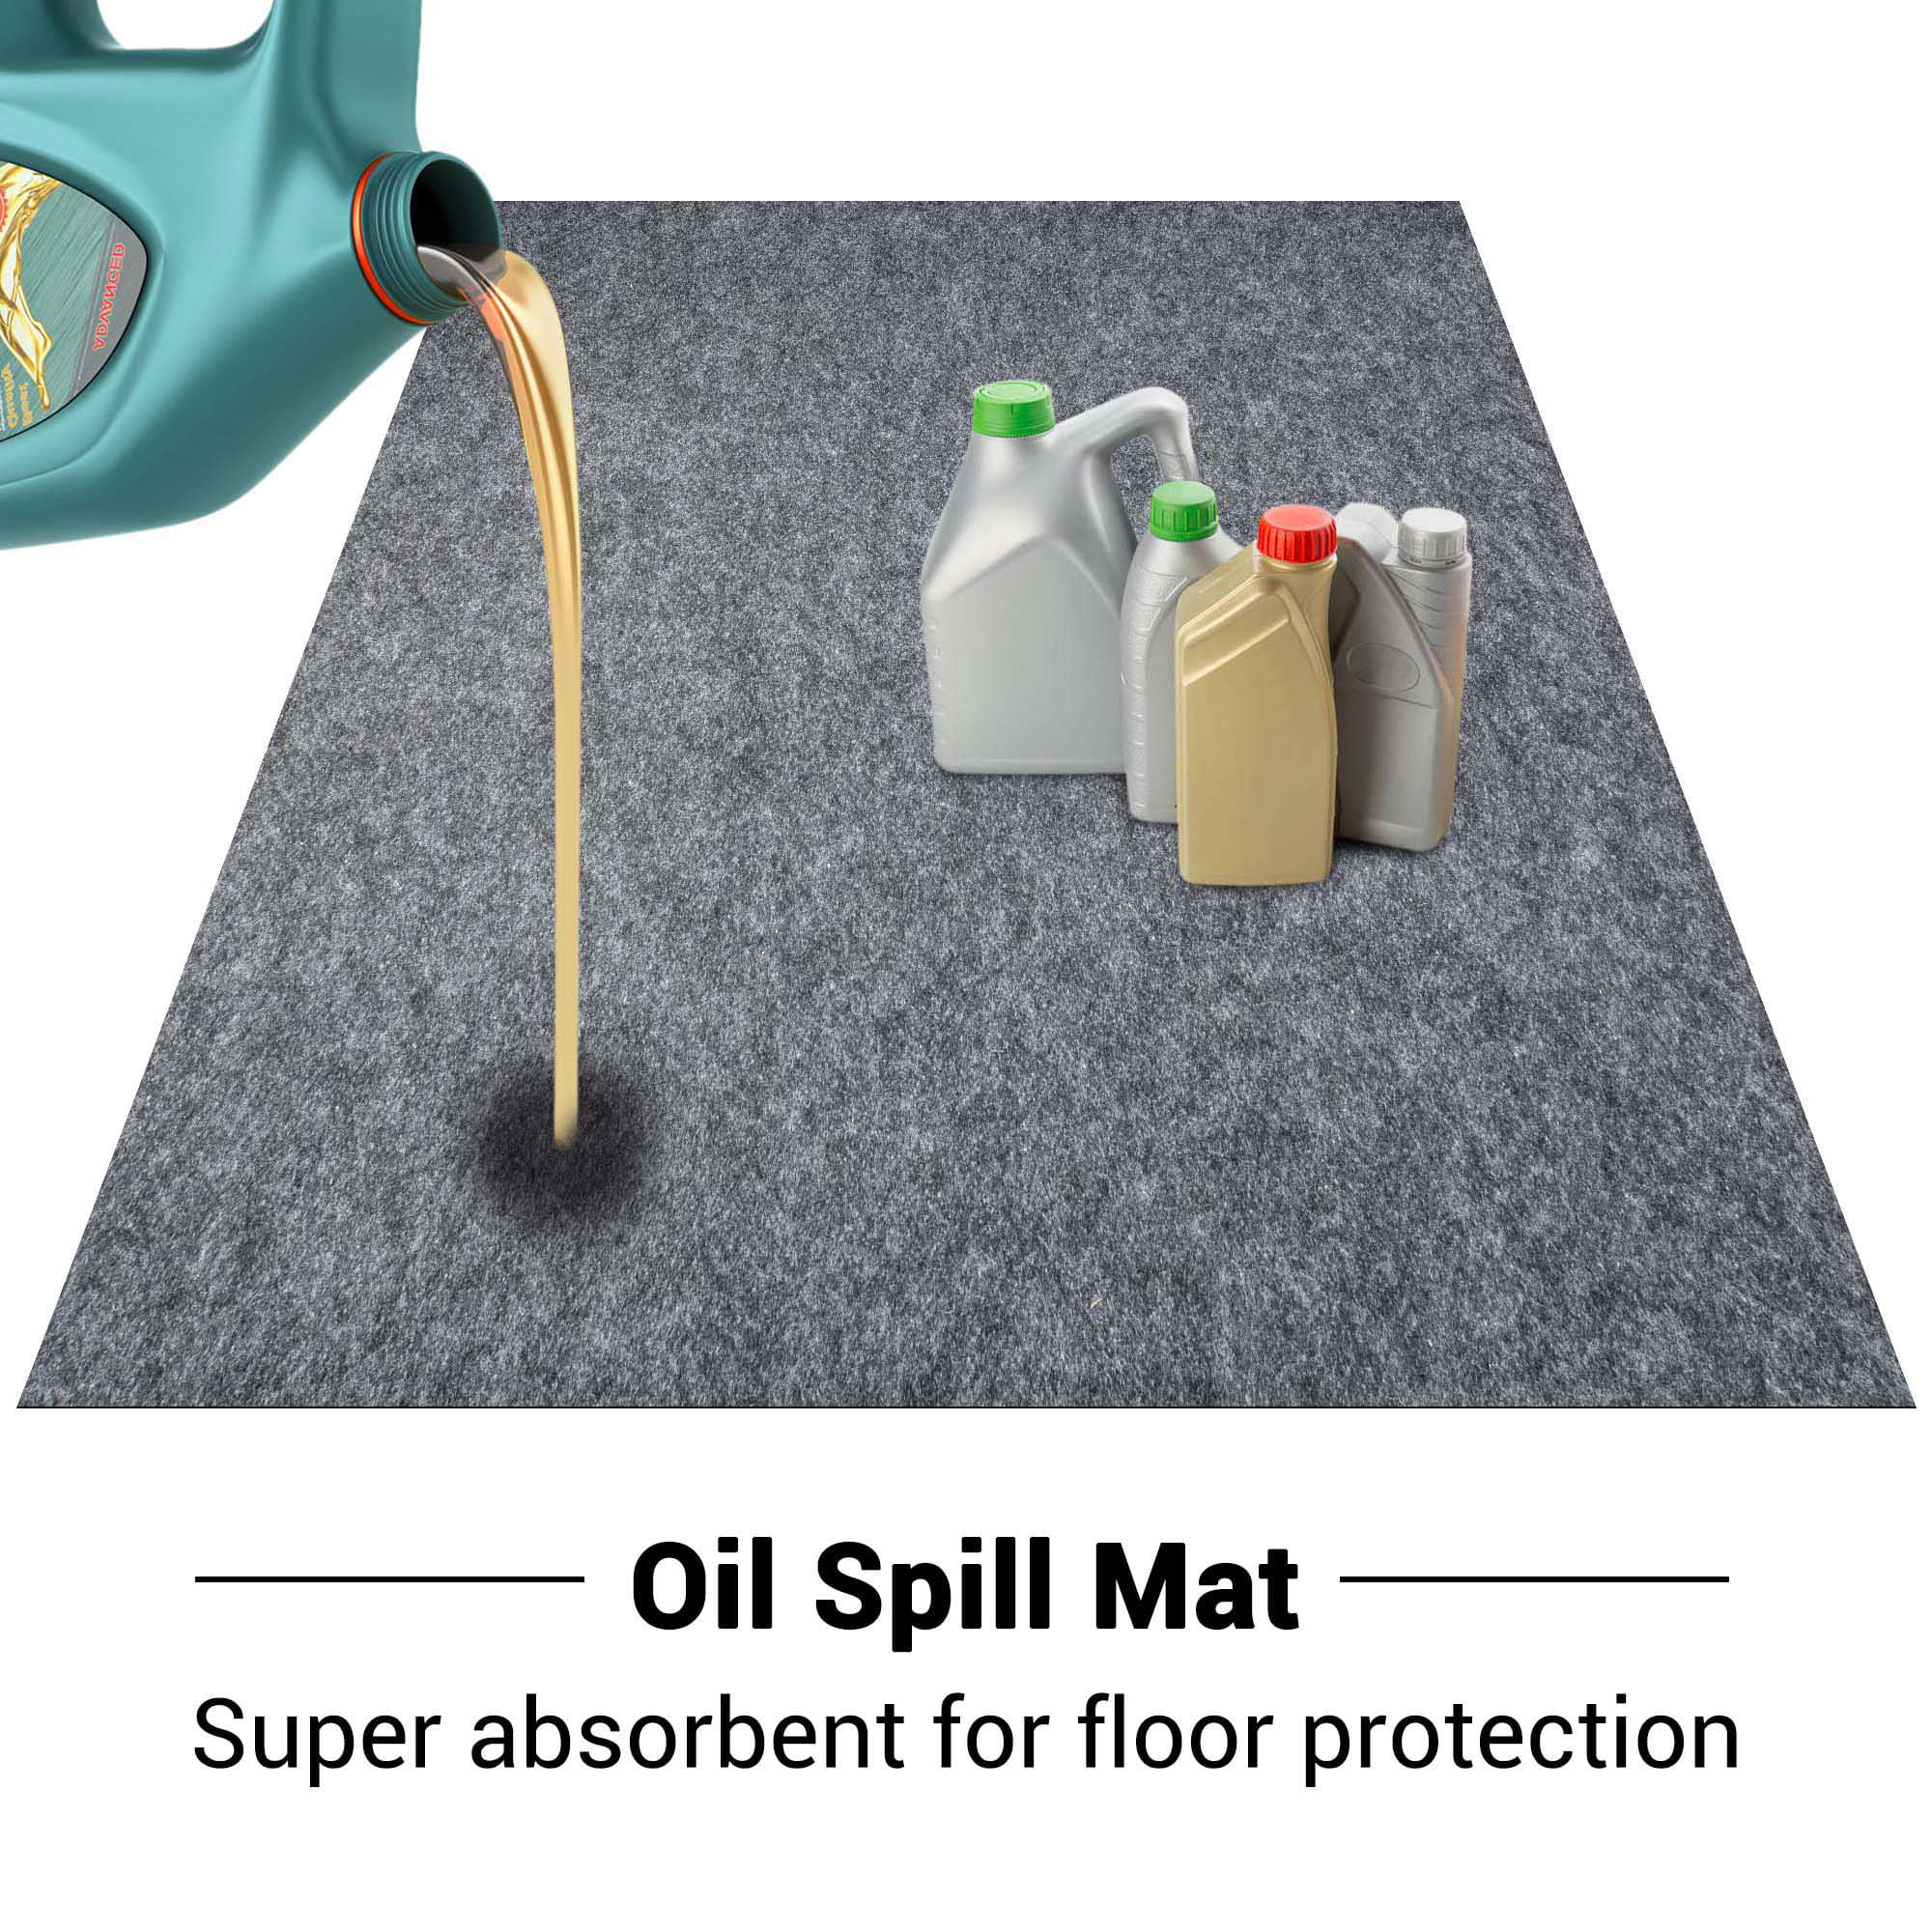 TREETONE Oil Spill Mat, 7.4 x 8.4 Ft, Premium Absorbent Oil Pad. Contains  Liquids, Protects Garage Floor from Spills, Drips, Splashes and Stains.